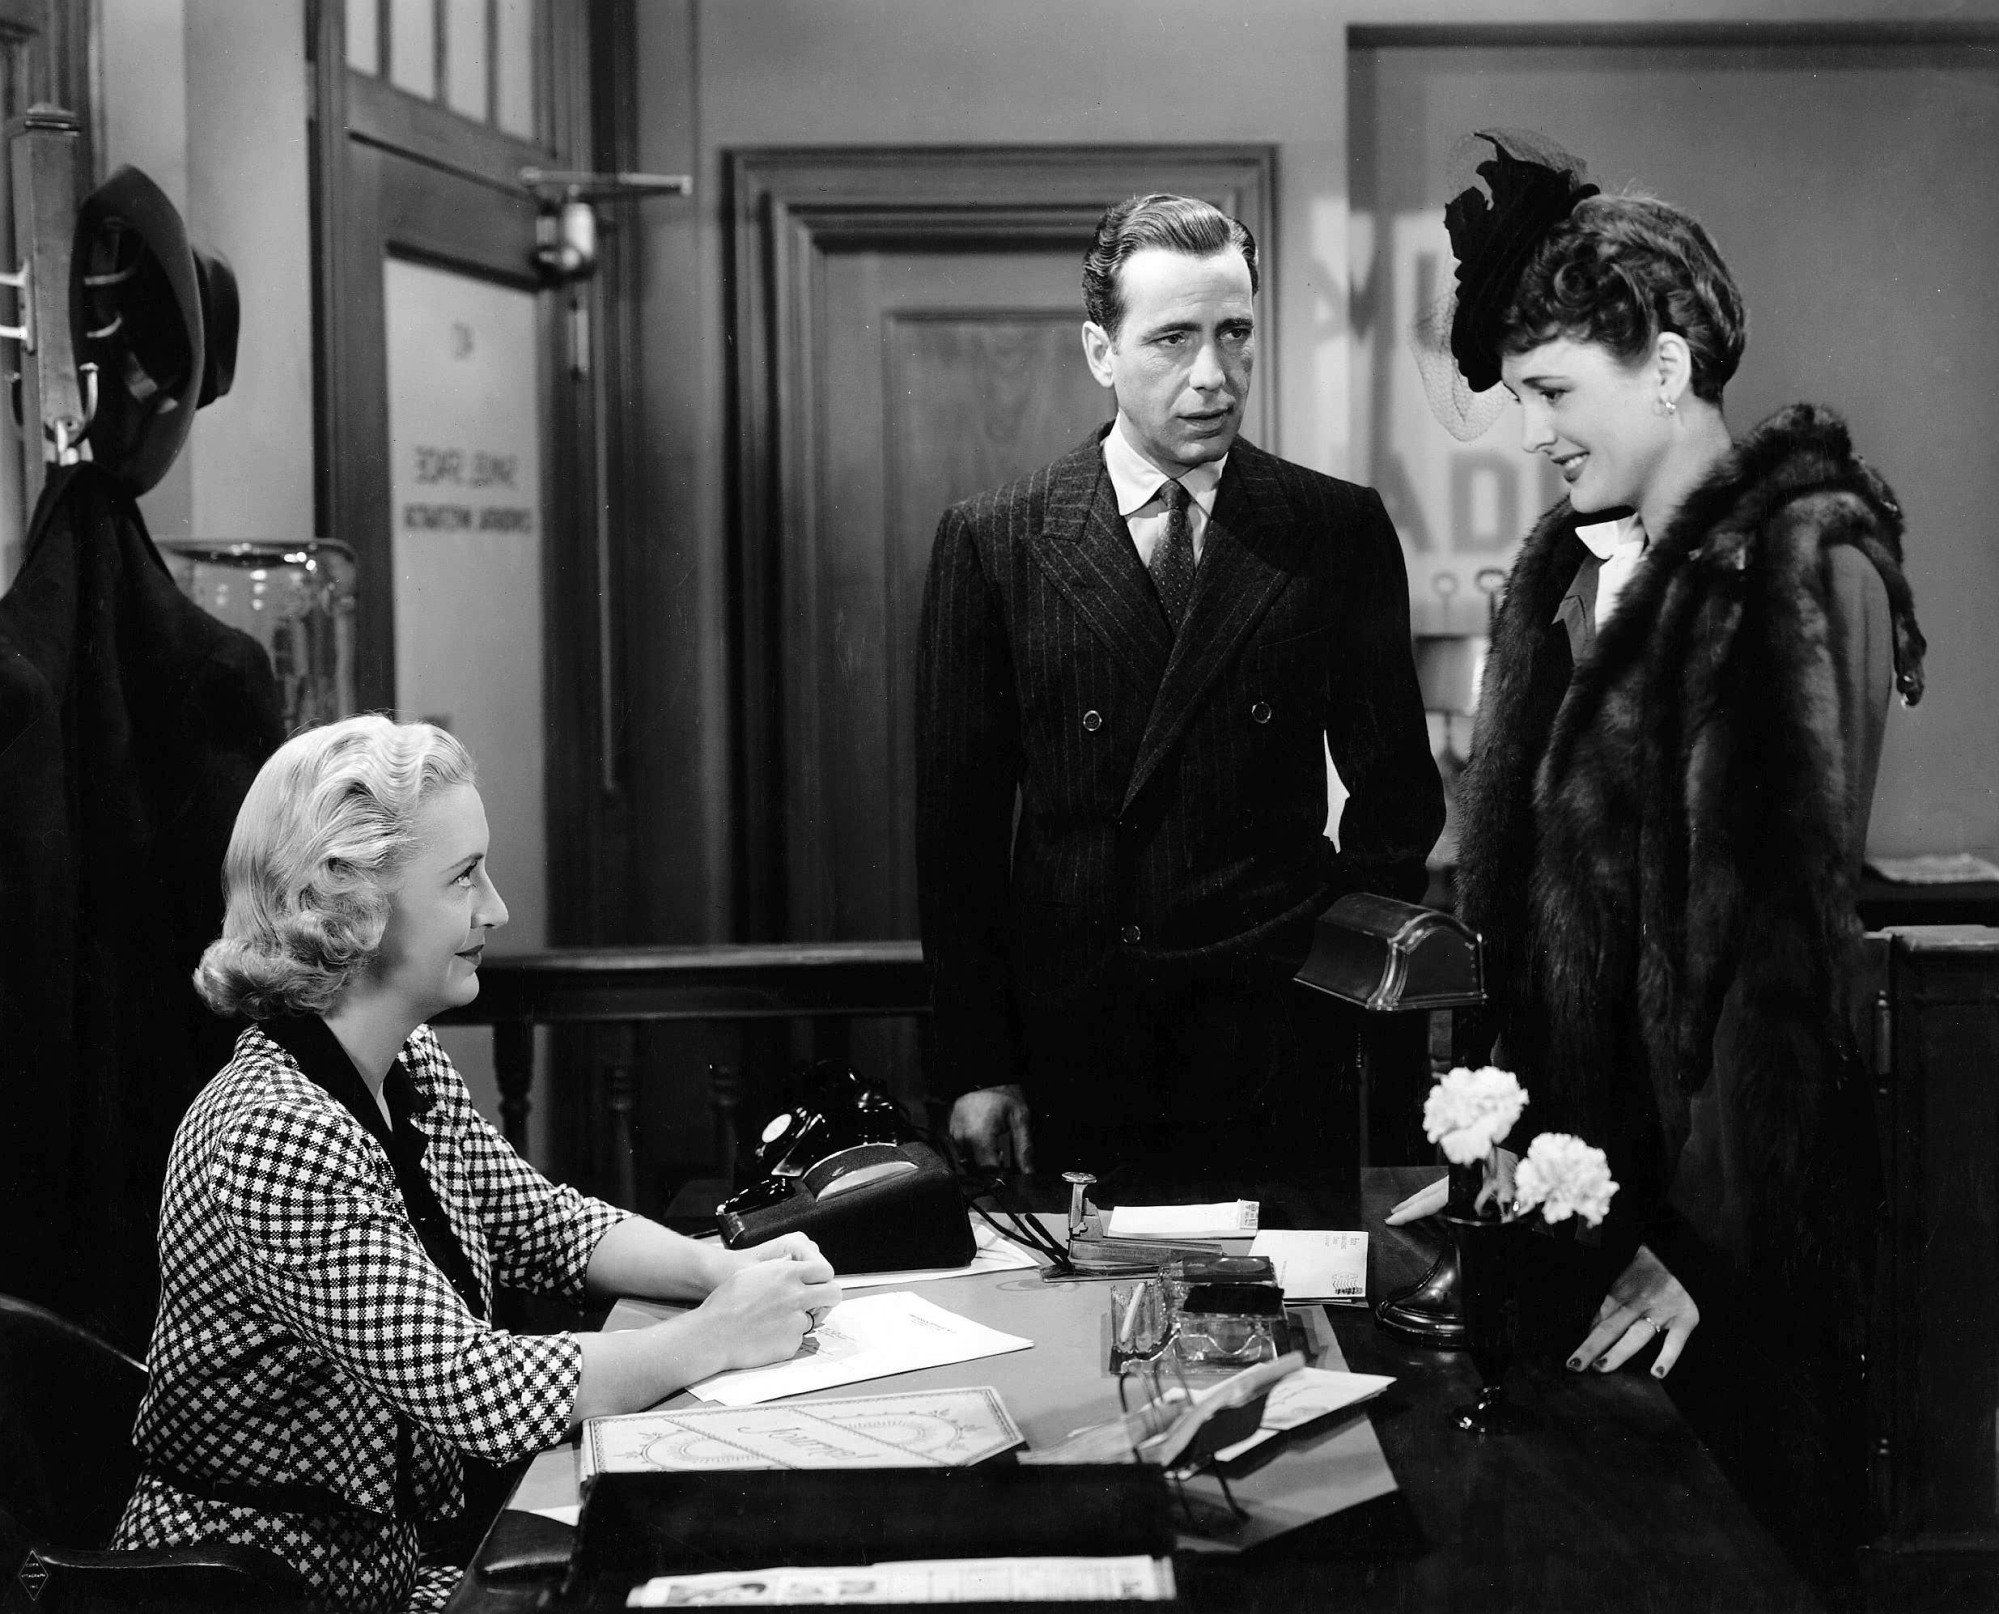 Humphrey Bogart, Mary Astor, and Lee Patrick talk in an office in "the Maltese Falcon."